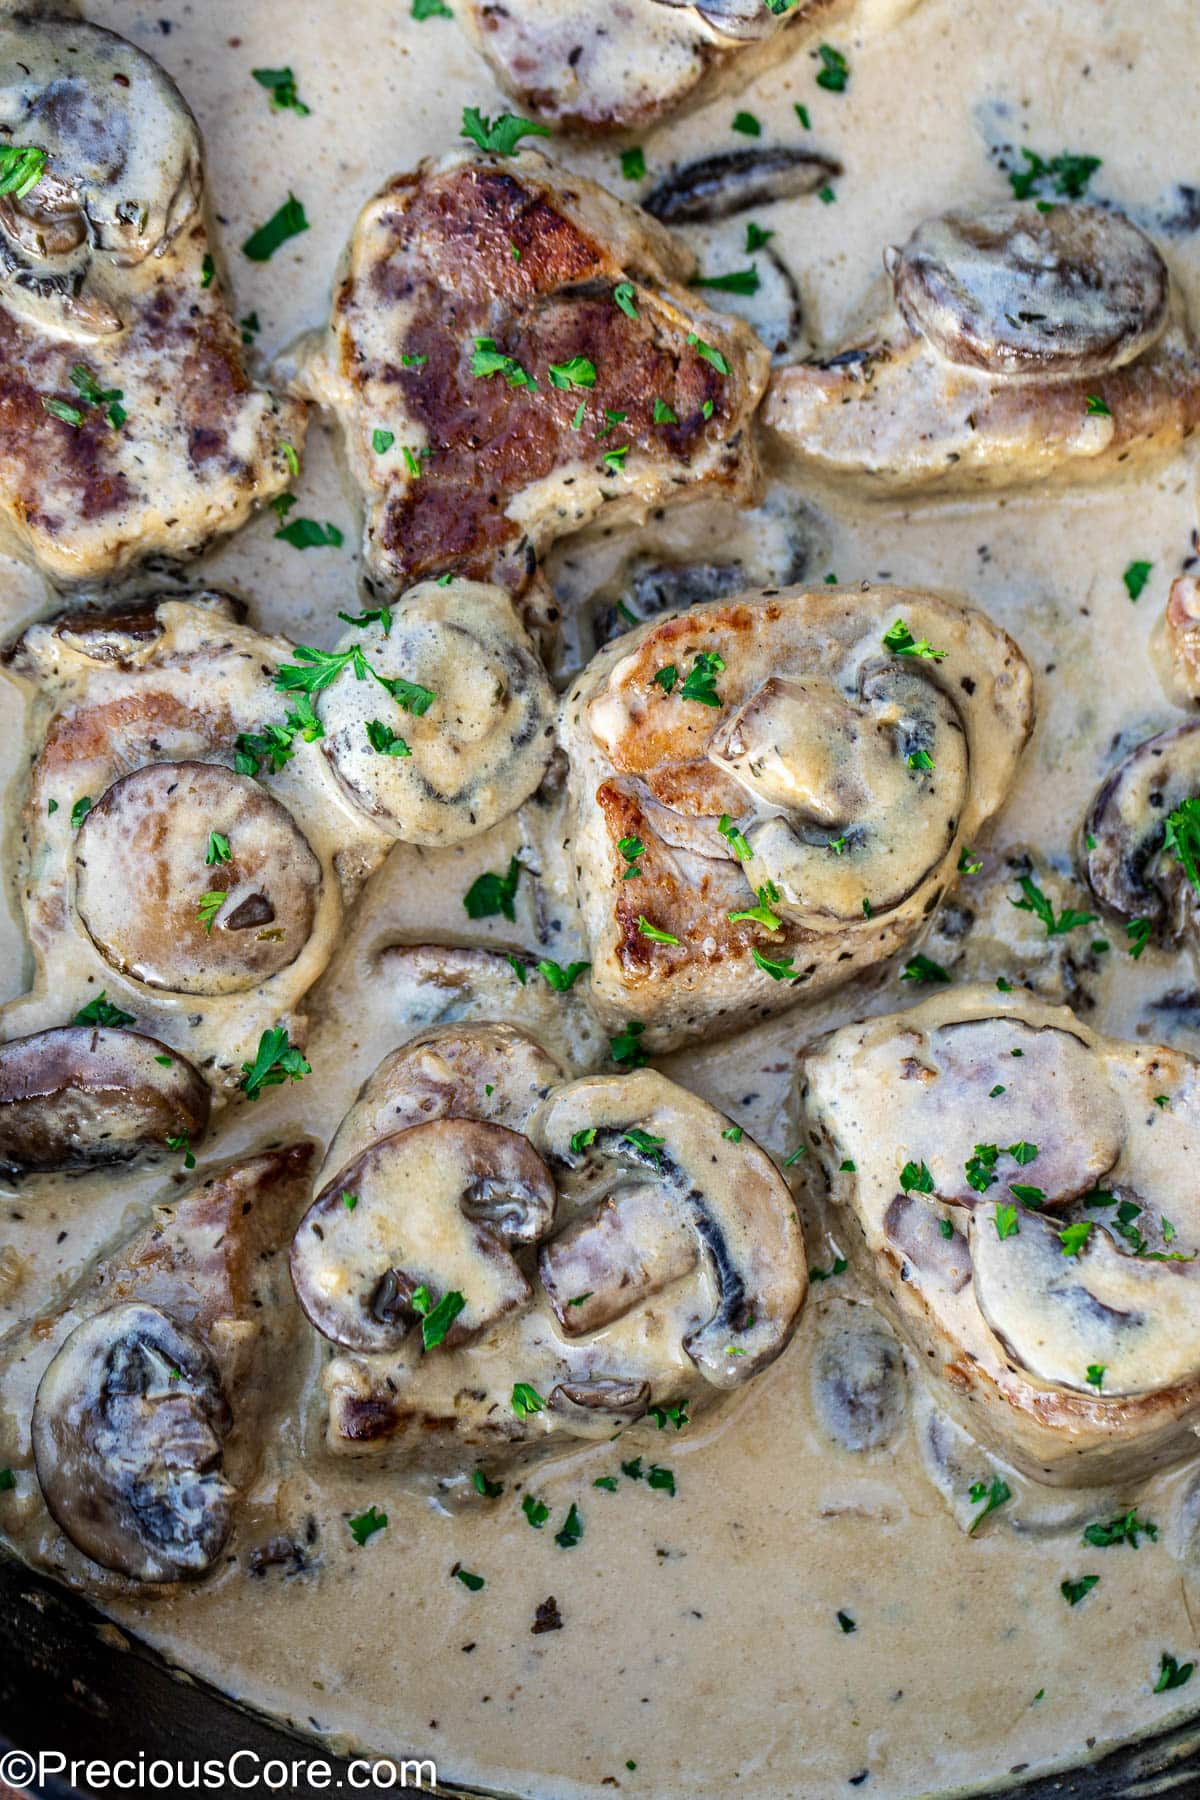 Pork medallions topped with mushrooms in a savory creamy sauce.